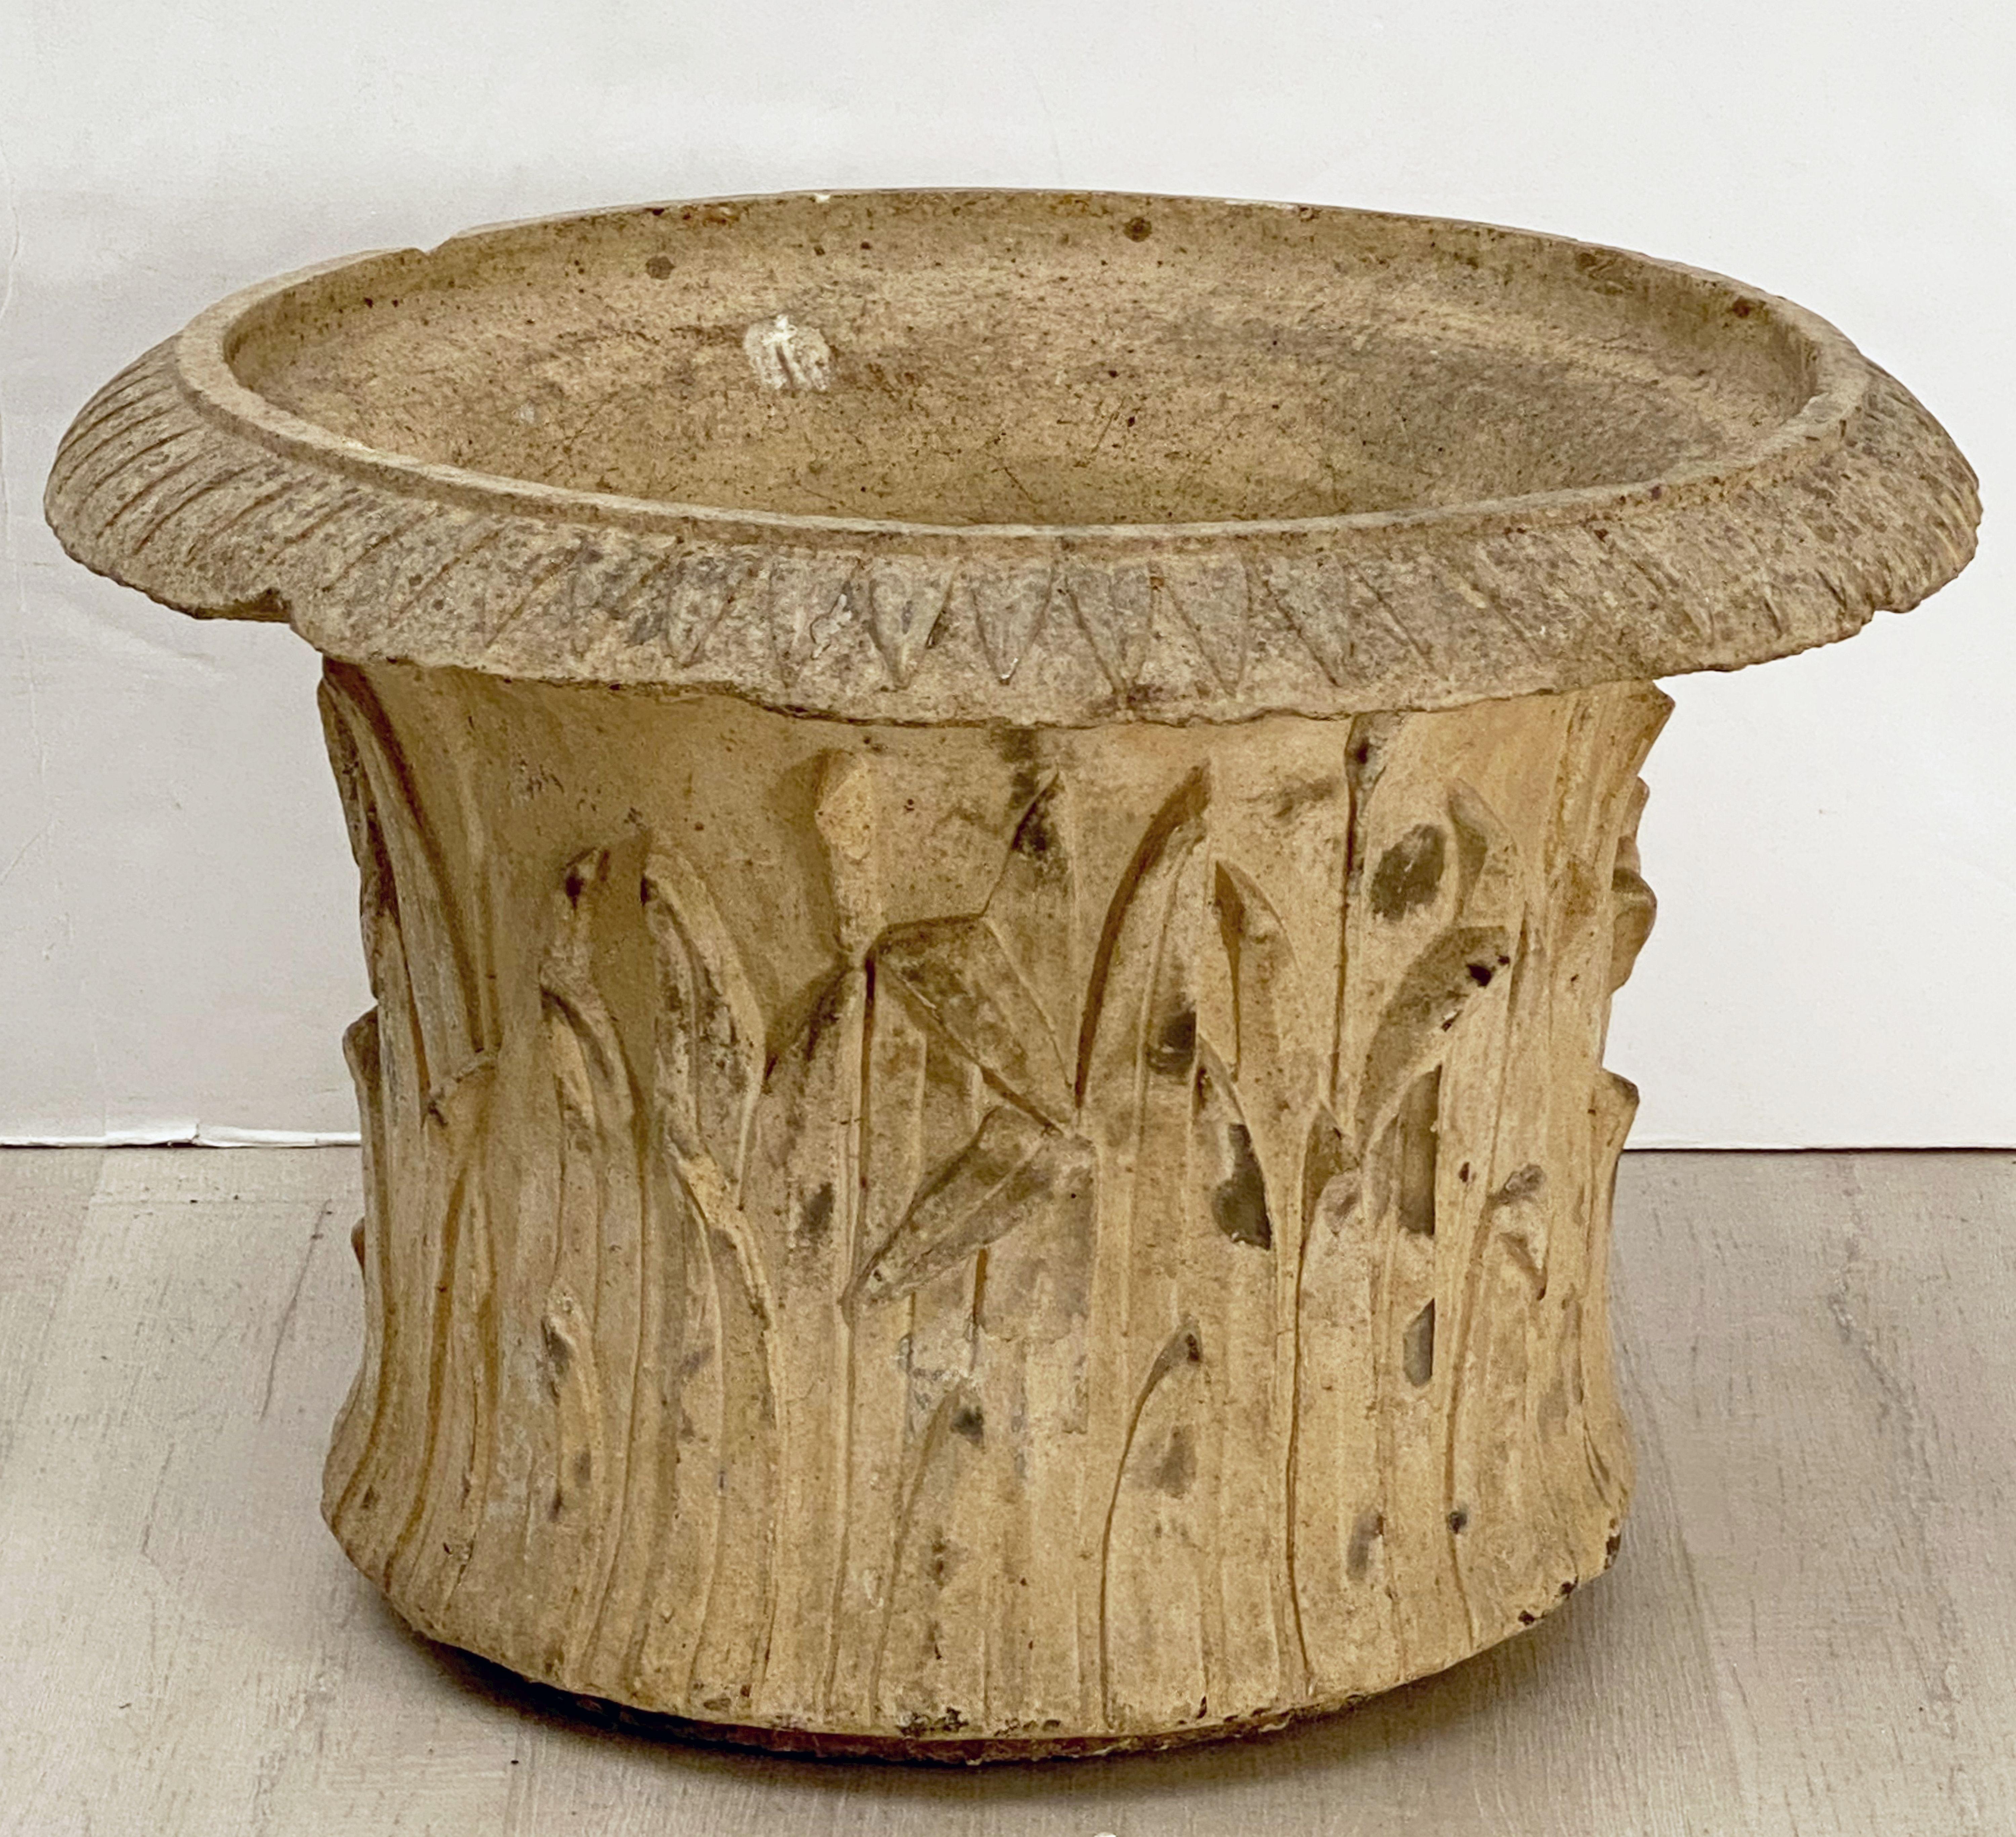 Large English Garden Planter Pot or Urn of Terracotta from the 19th Century 13